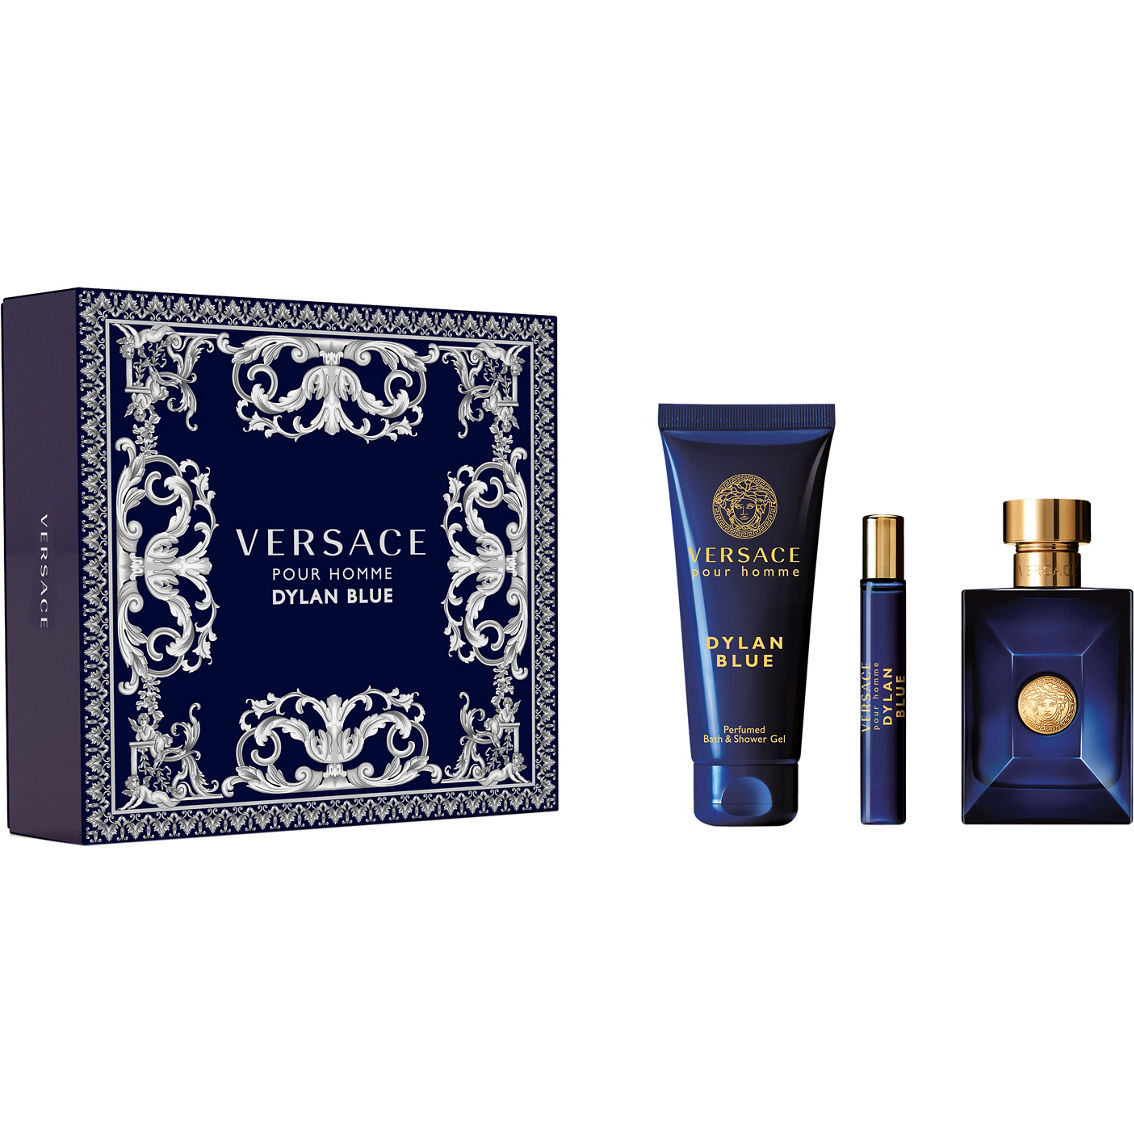 Versace Dylan Blue Pour Homme 3 Pc. Gift Set, Gifts Sets For Him, Beauty  & Health